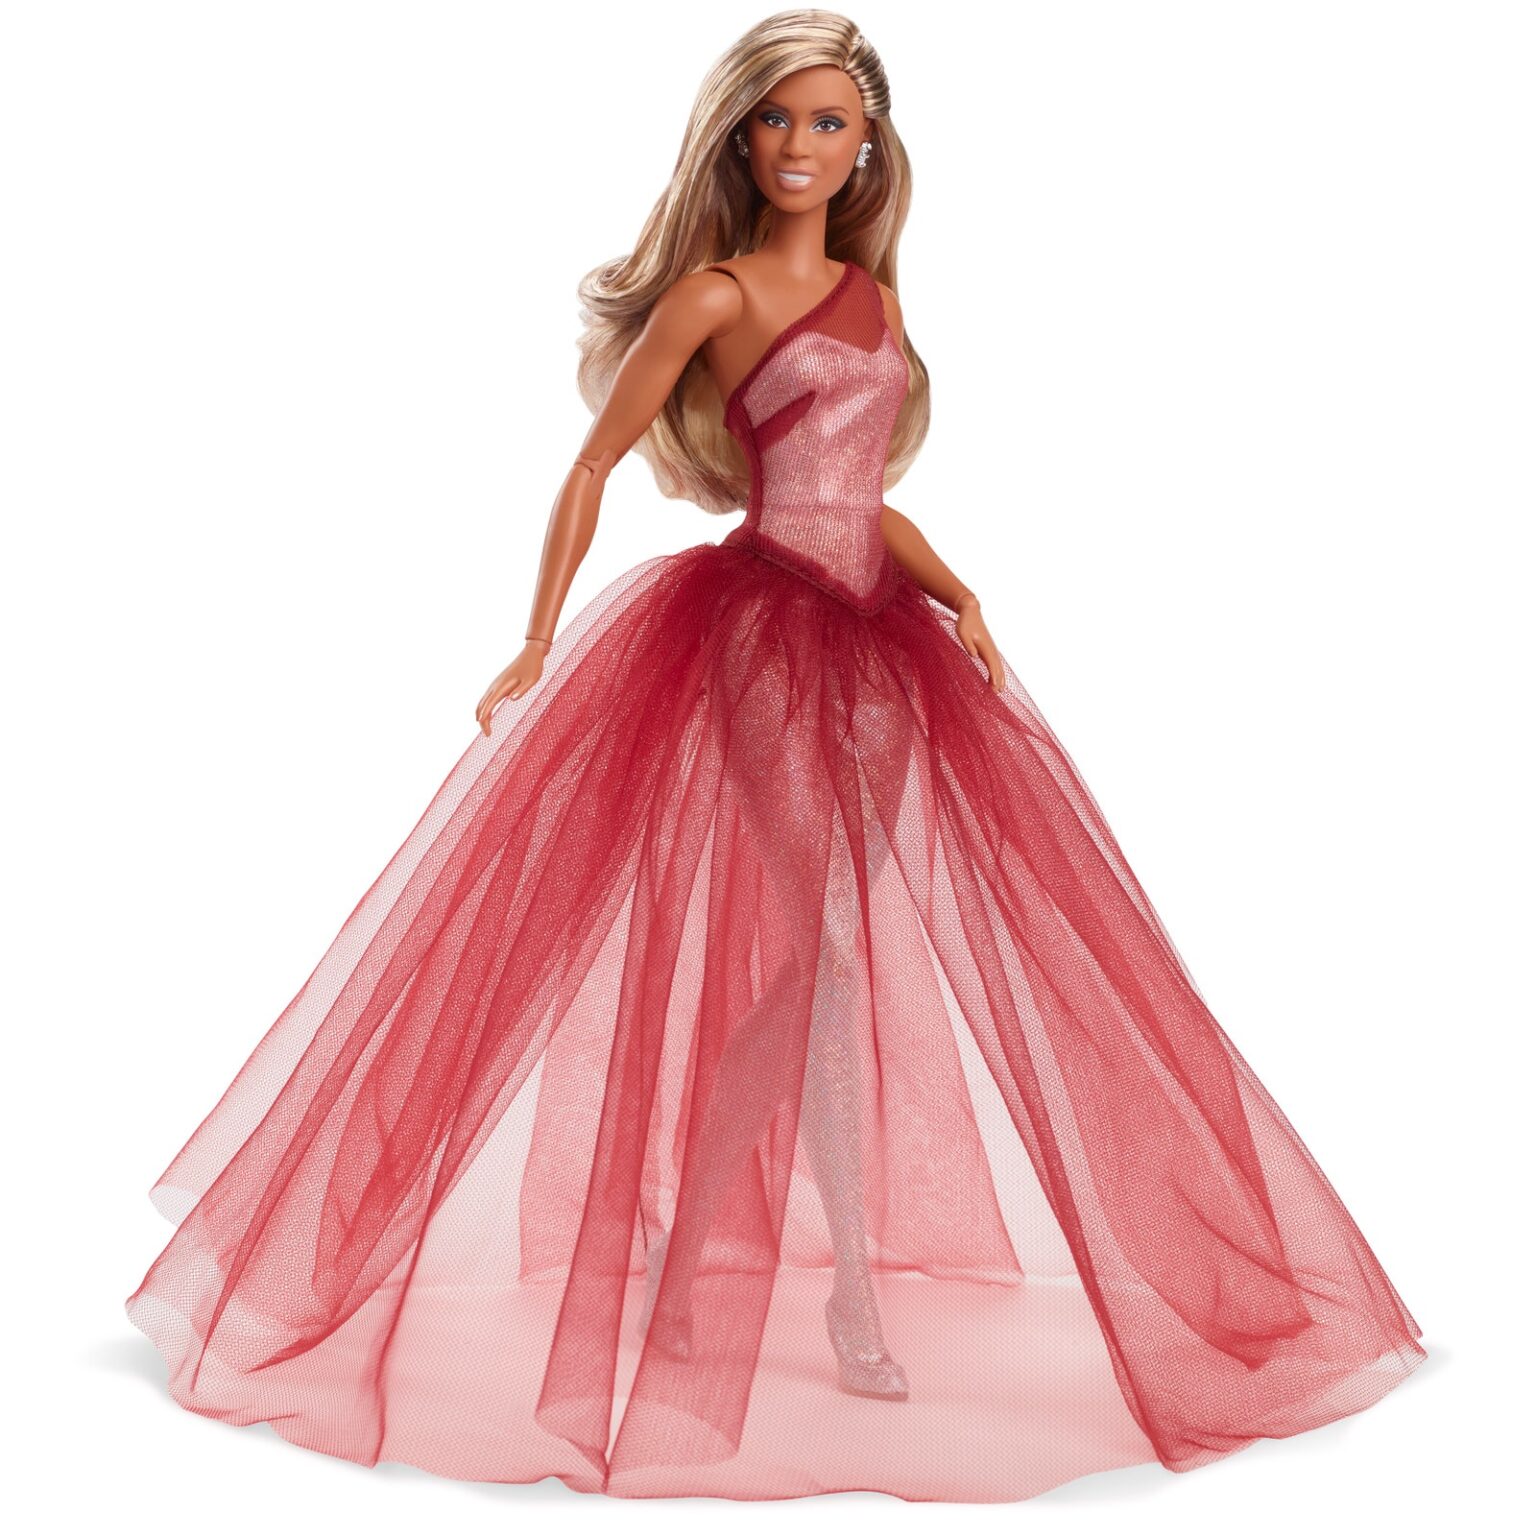 Laverne Cox Makes History By Inspiring The First Trans Barbie Doll Fashnfly 6585